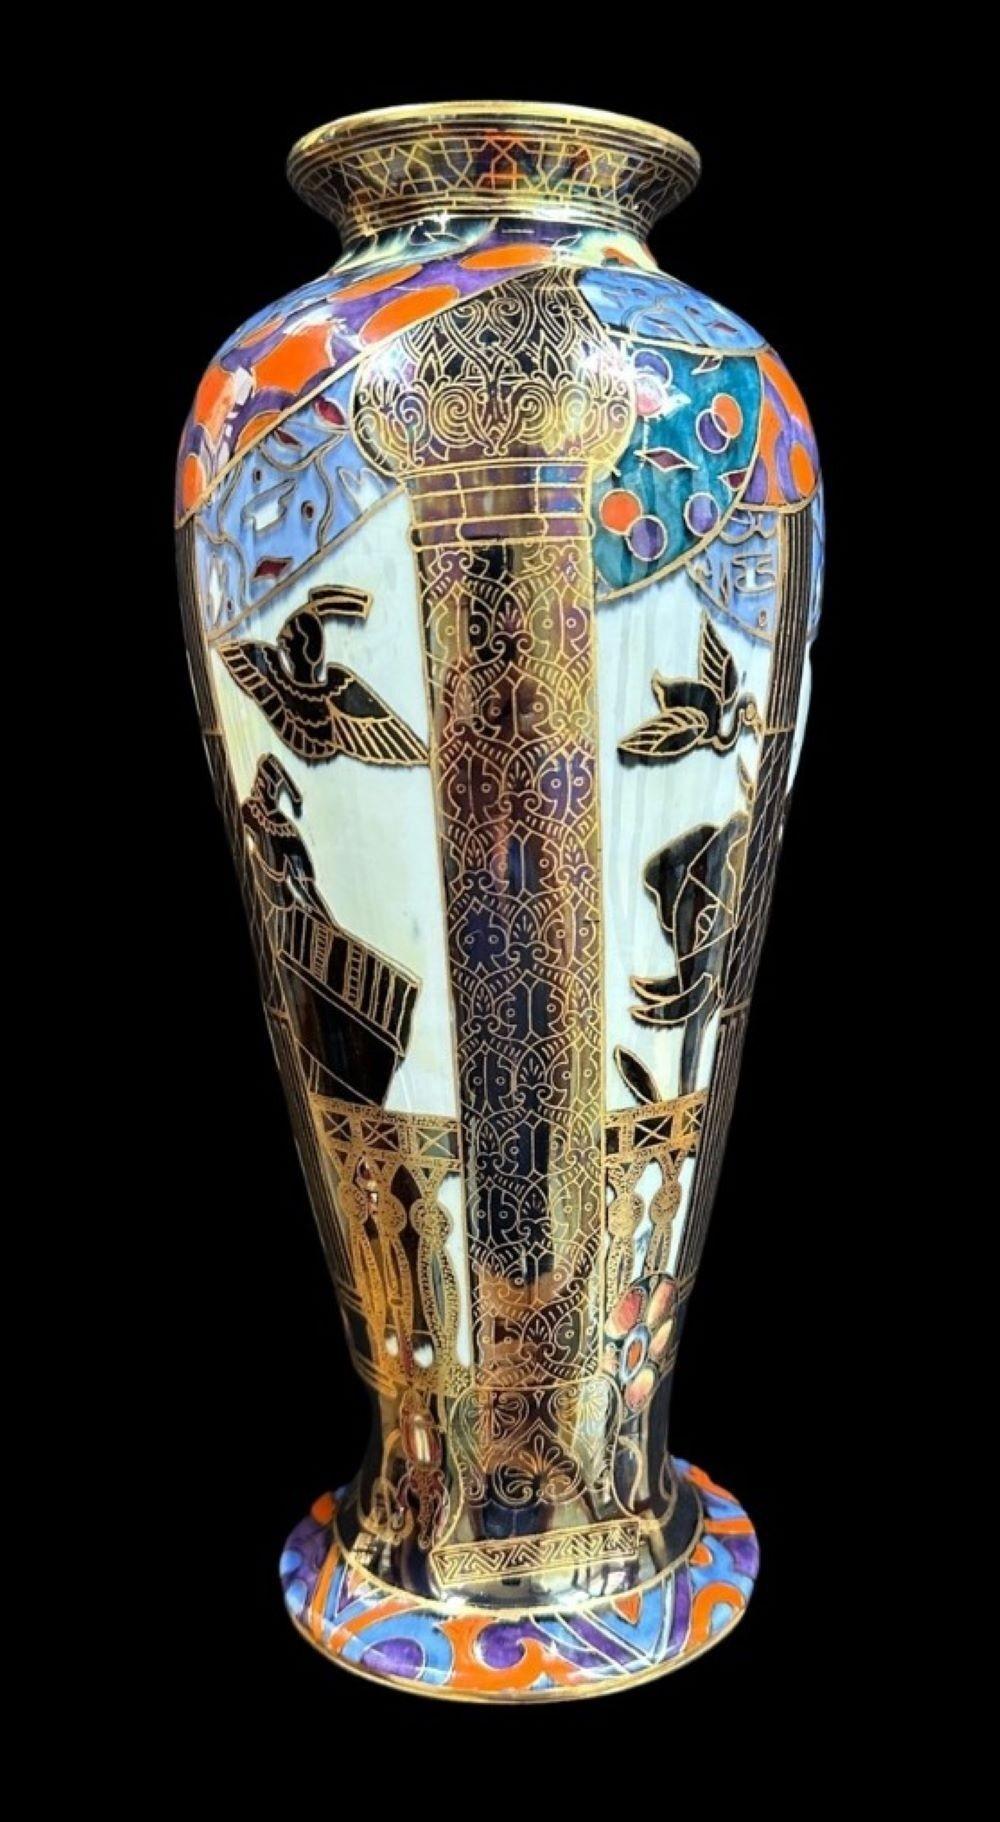 5437
Daisy Makeig Jones for Wedgwood. A Baluster Vase decorated with the “Lahore” design featuring Elephants and Birds within an Art Deco Border
26.5cm high, 11cm wide
Circa 1920